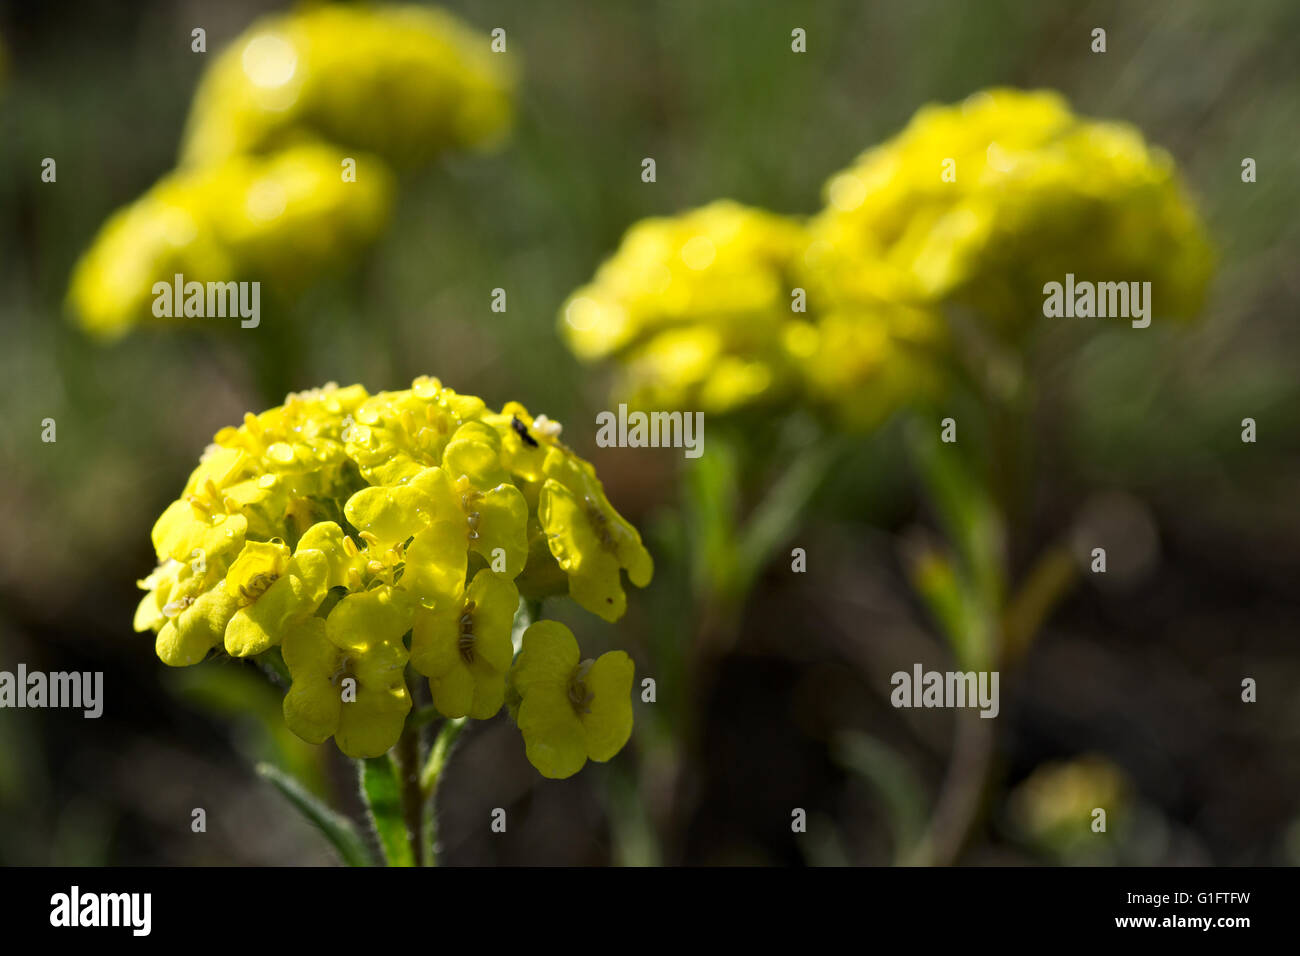 Alyssum montanum close-up with blurred background Stock Photo